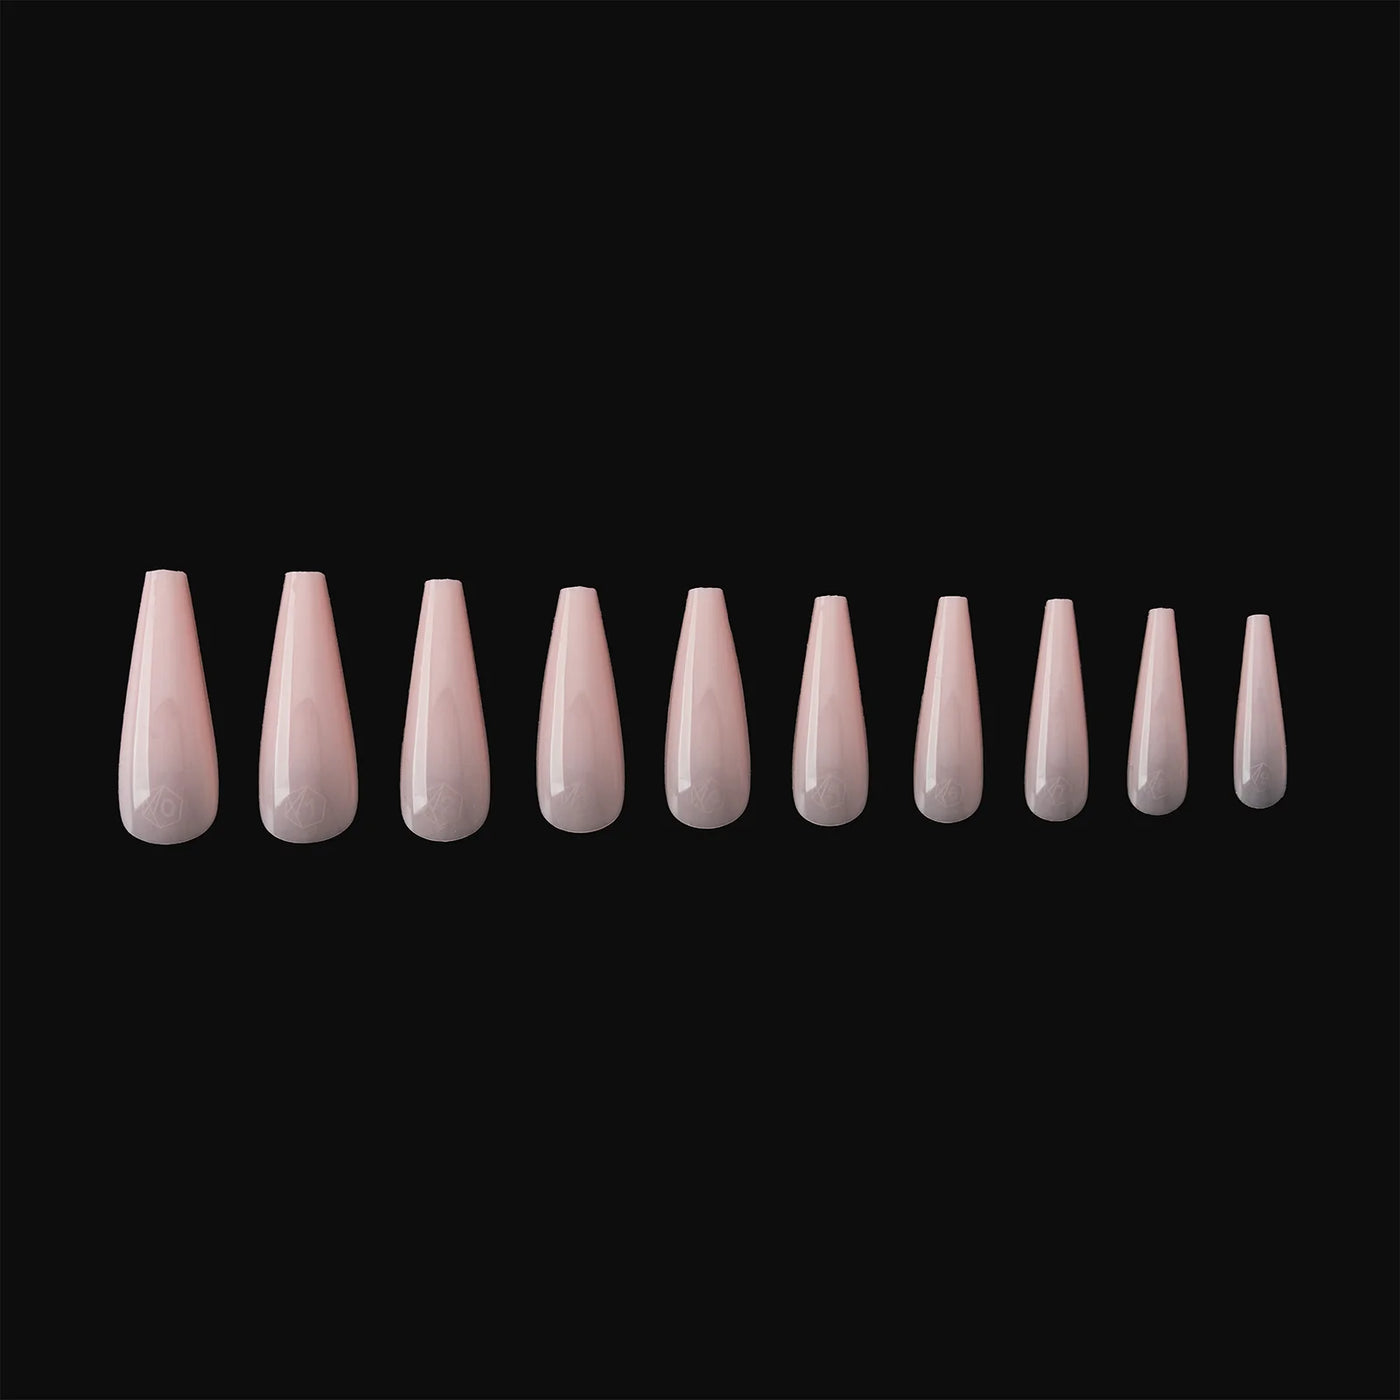 APRES - Chaun Legend Neutral Sculpted "Chaun" Tapered Coffin Extra Long Box of Tips (150pcs)